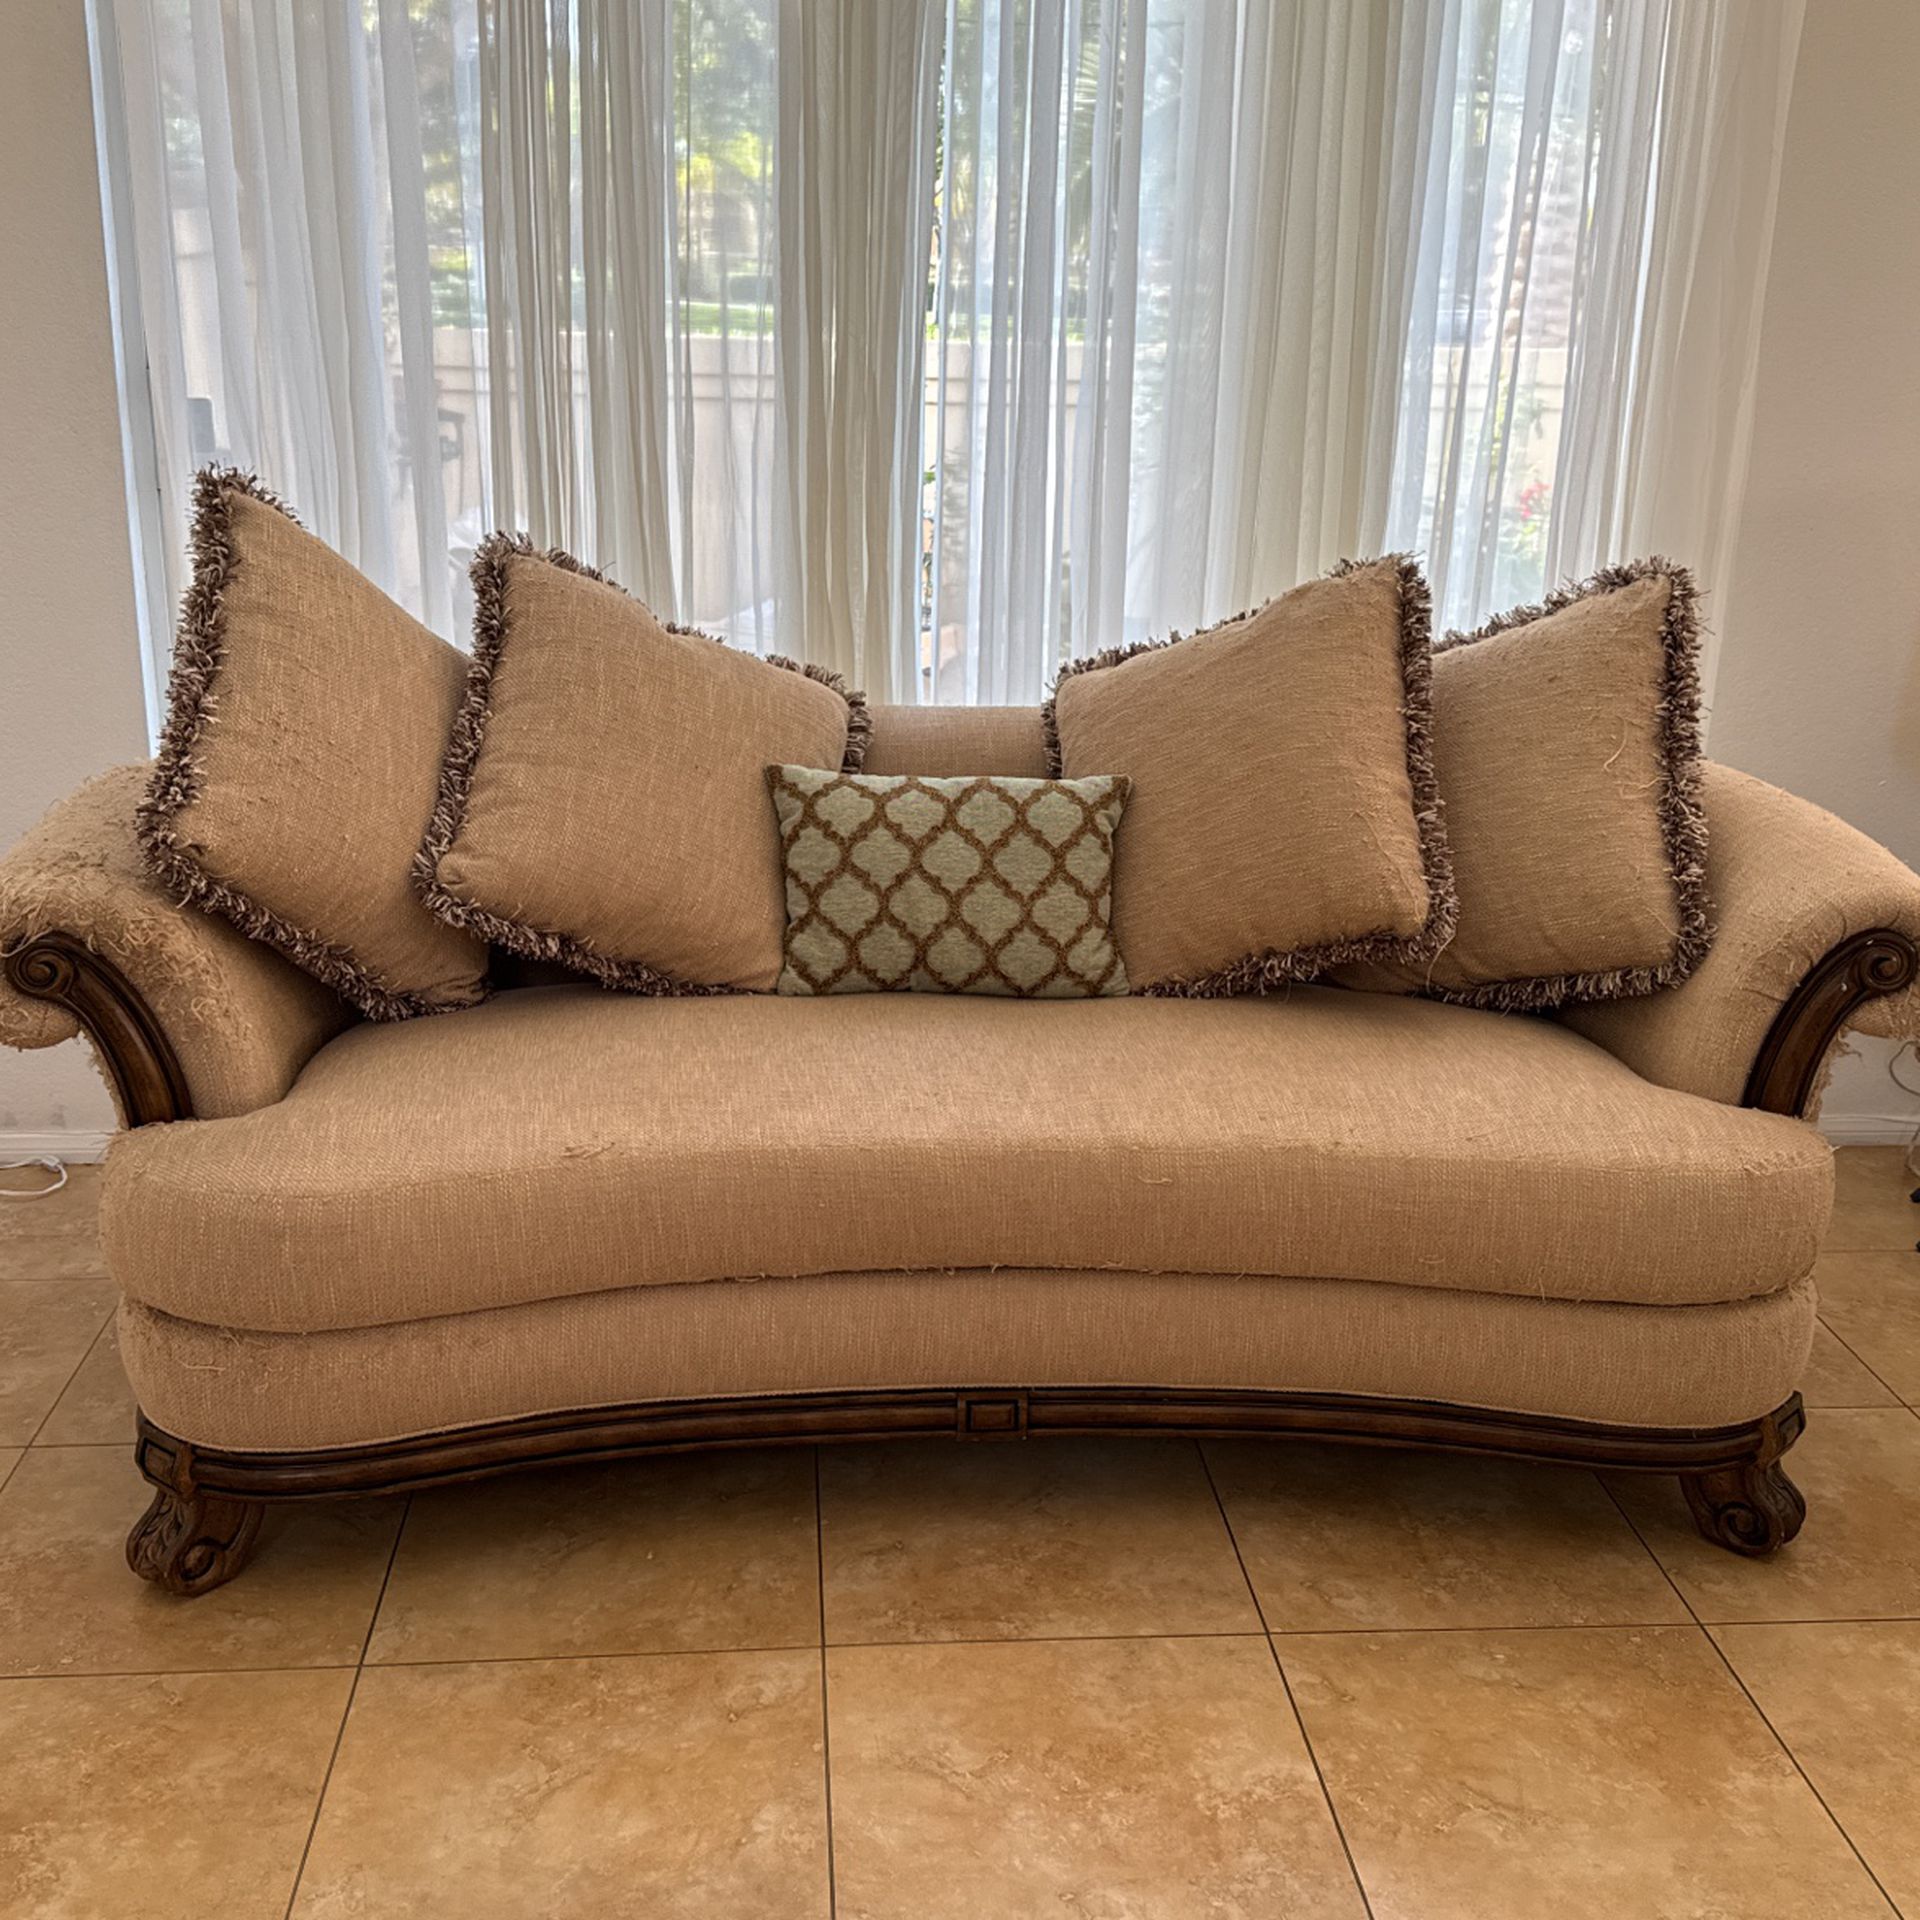 An Elegant Bernhard  Couch  With Four Pillows 